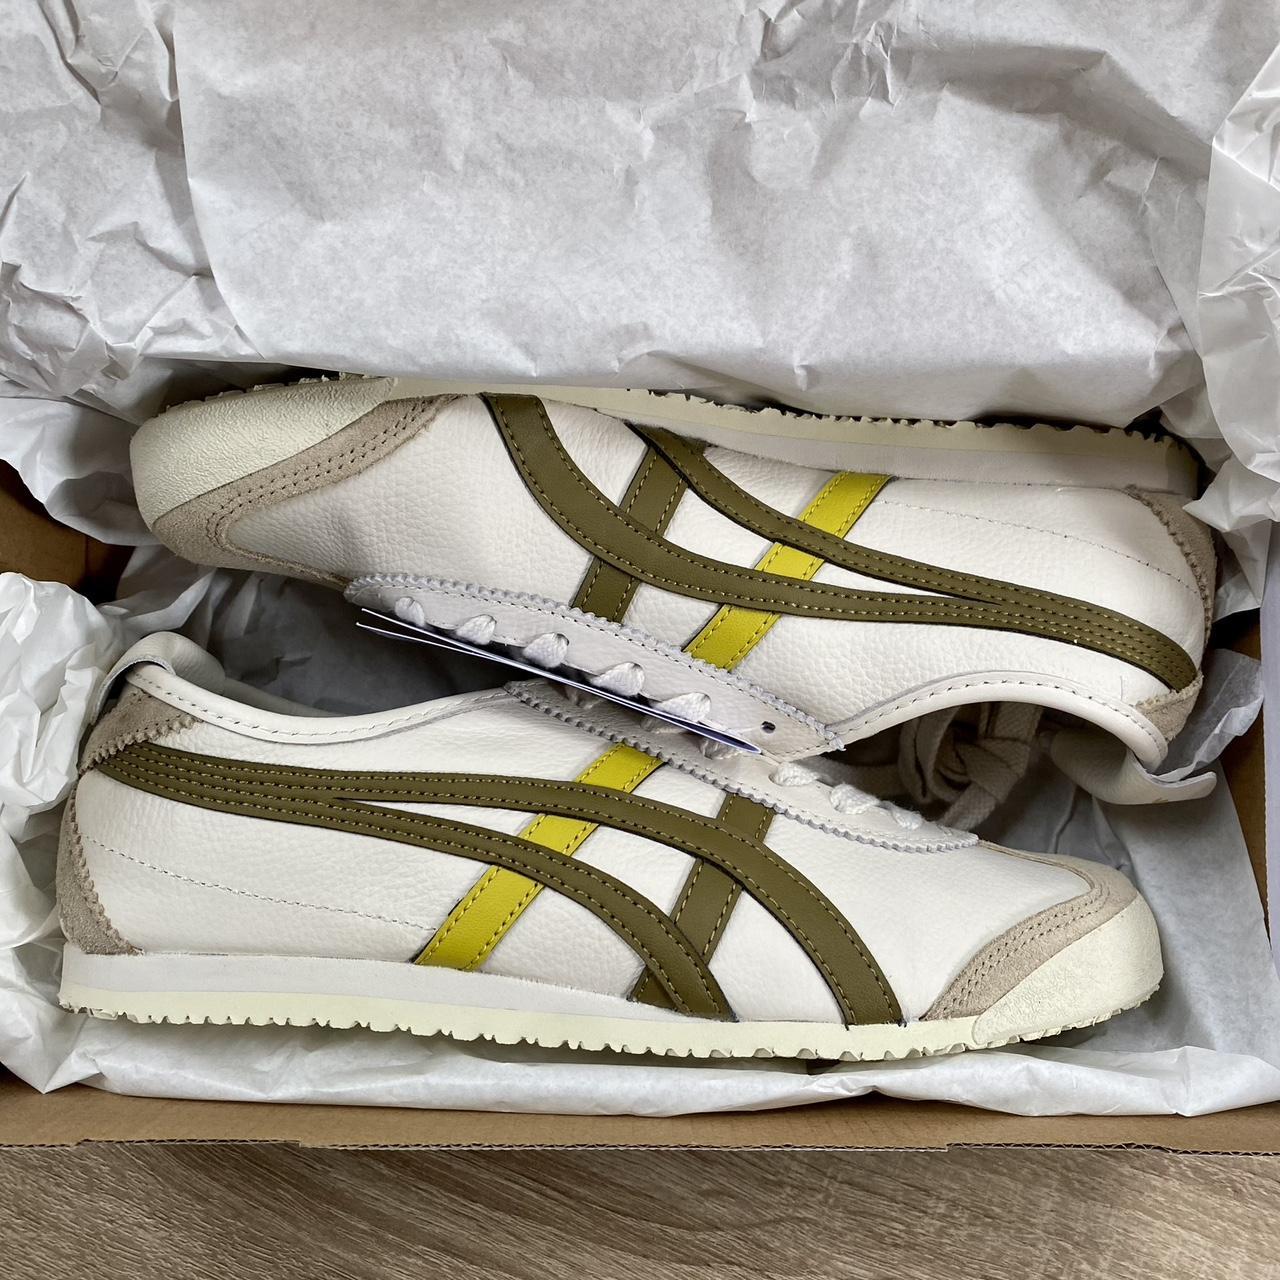 New Onitsuka Tiger Mexico 66 ASICS in Cream... - Depop